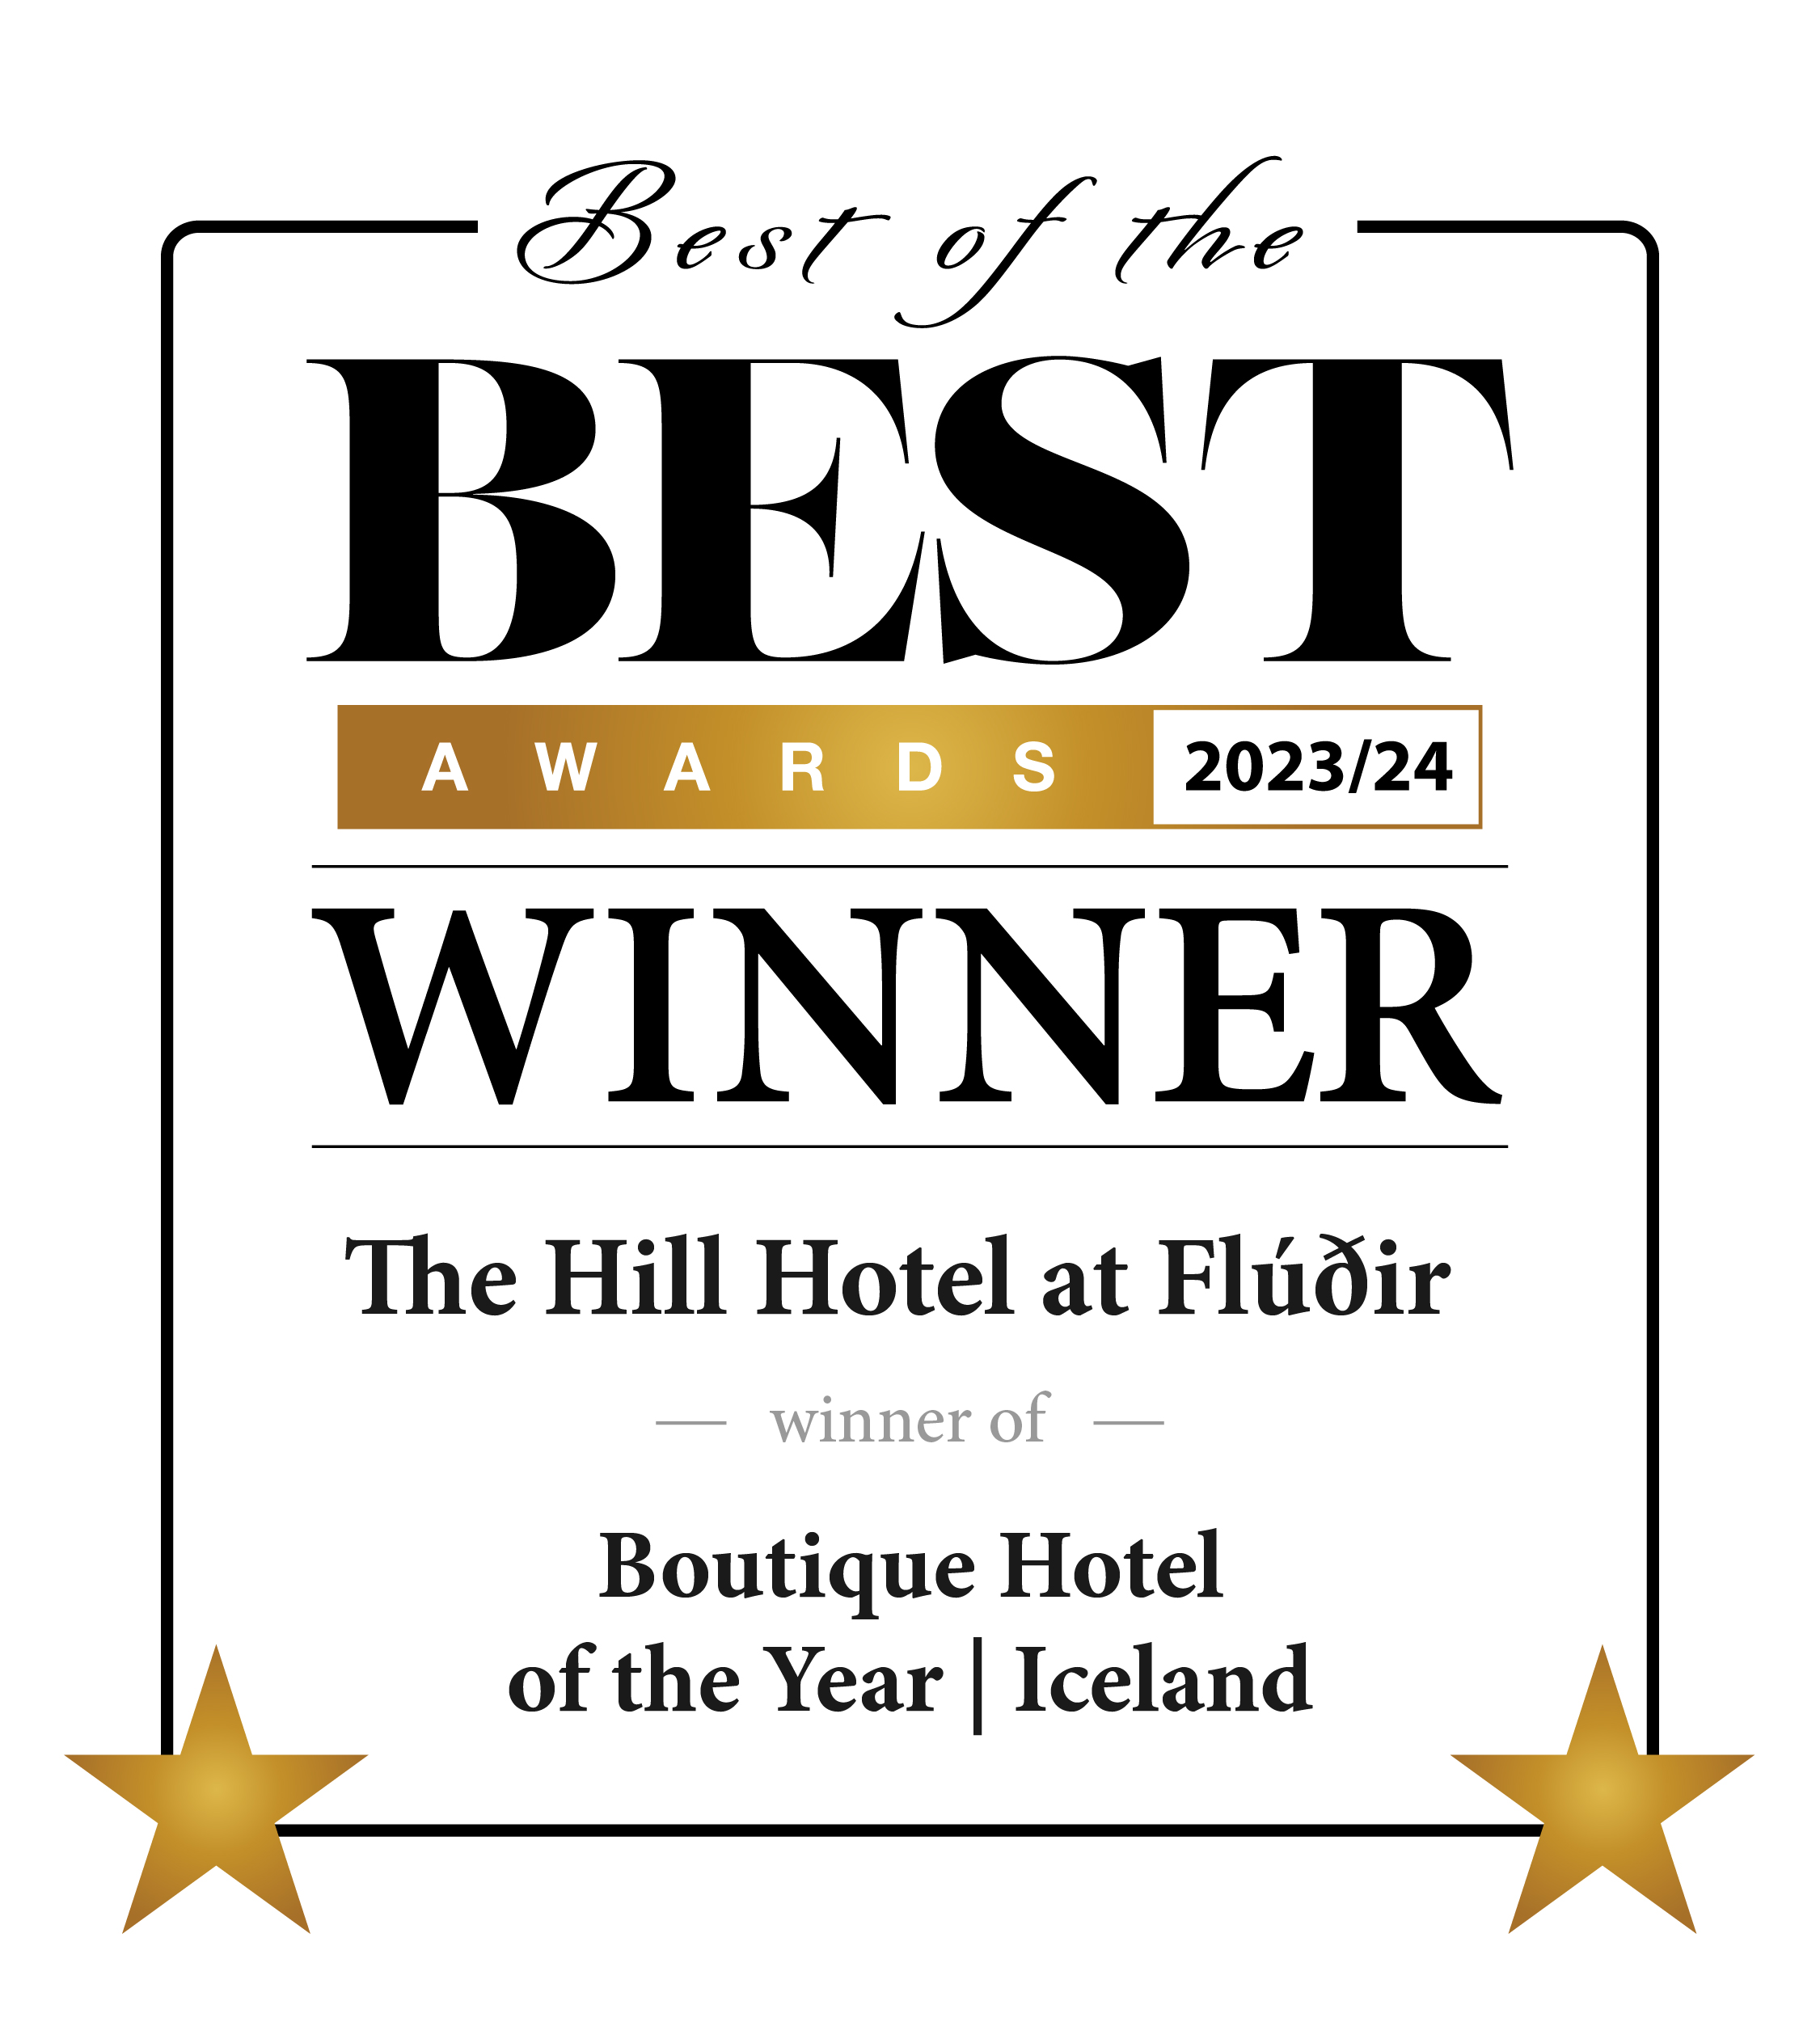 Boutique Hotel of the Year Award